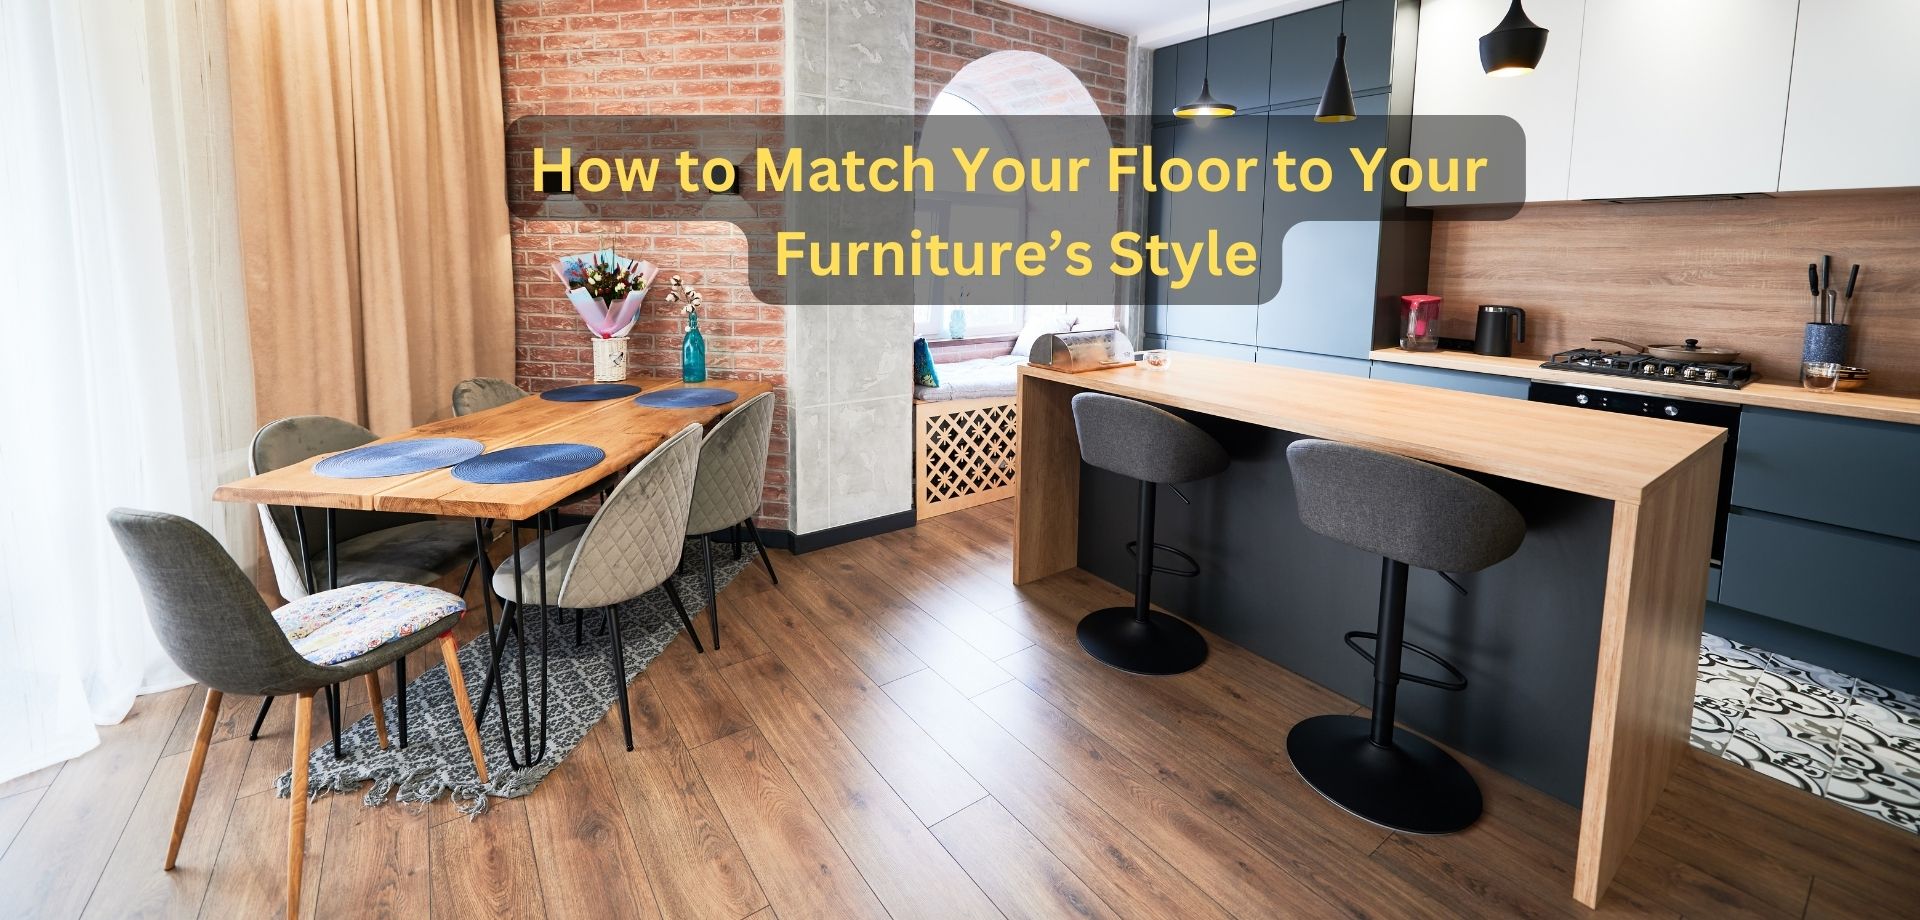 How to Match Your Floor to Your Furniture’s Style